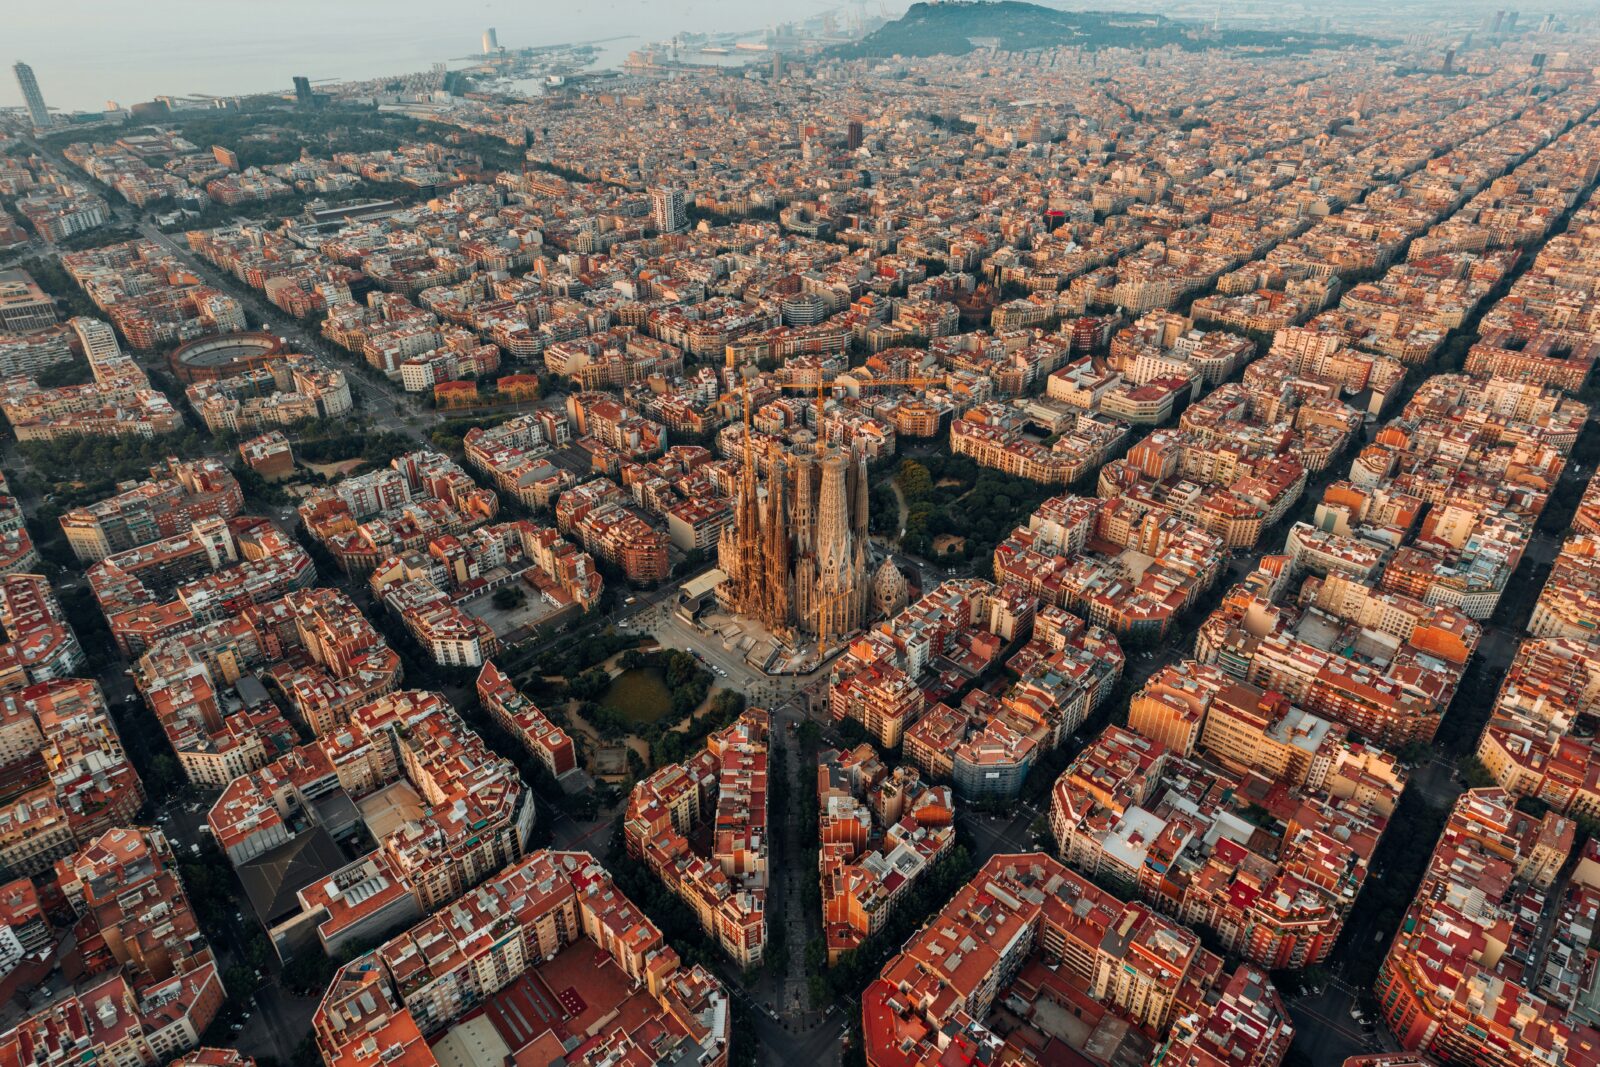 A day trip around Barcelona is possible with return flights from Manchester